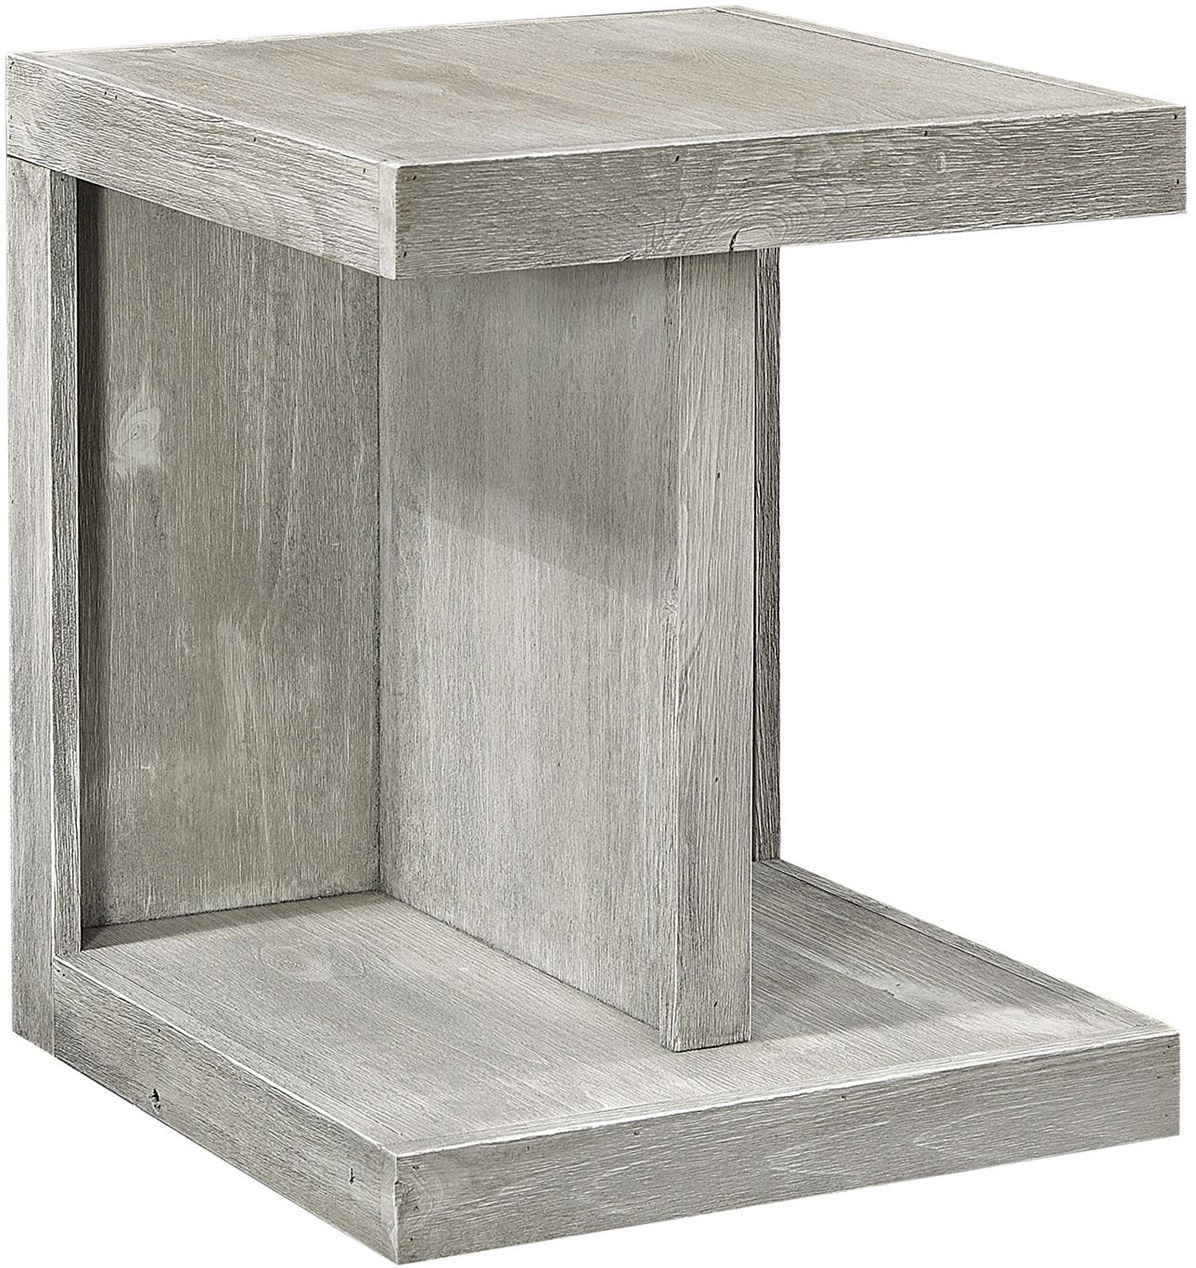 Avery Loft End Table in the Limestone finish